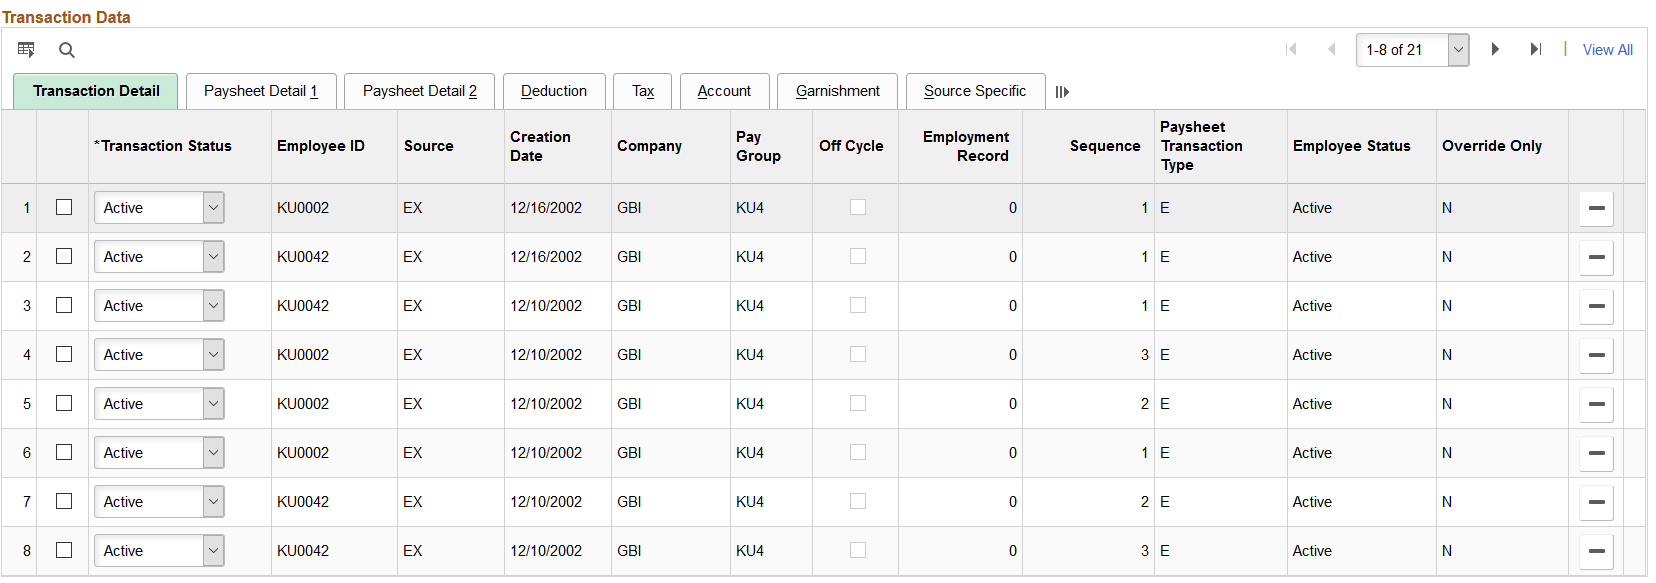 Update Paysheet Transactions page with the Paysheet Update for Inactive Employees Enabled (2 of 2)